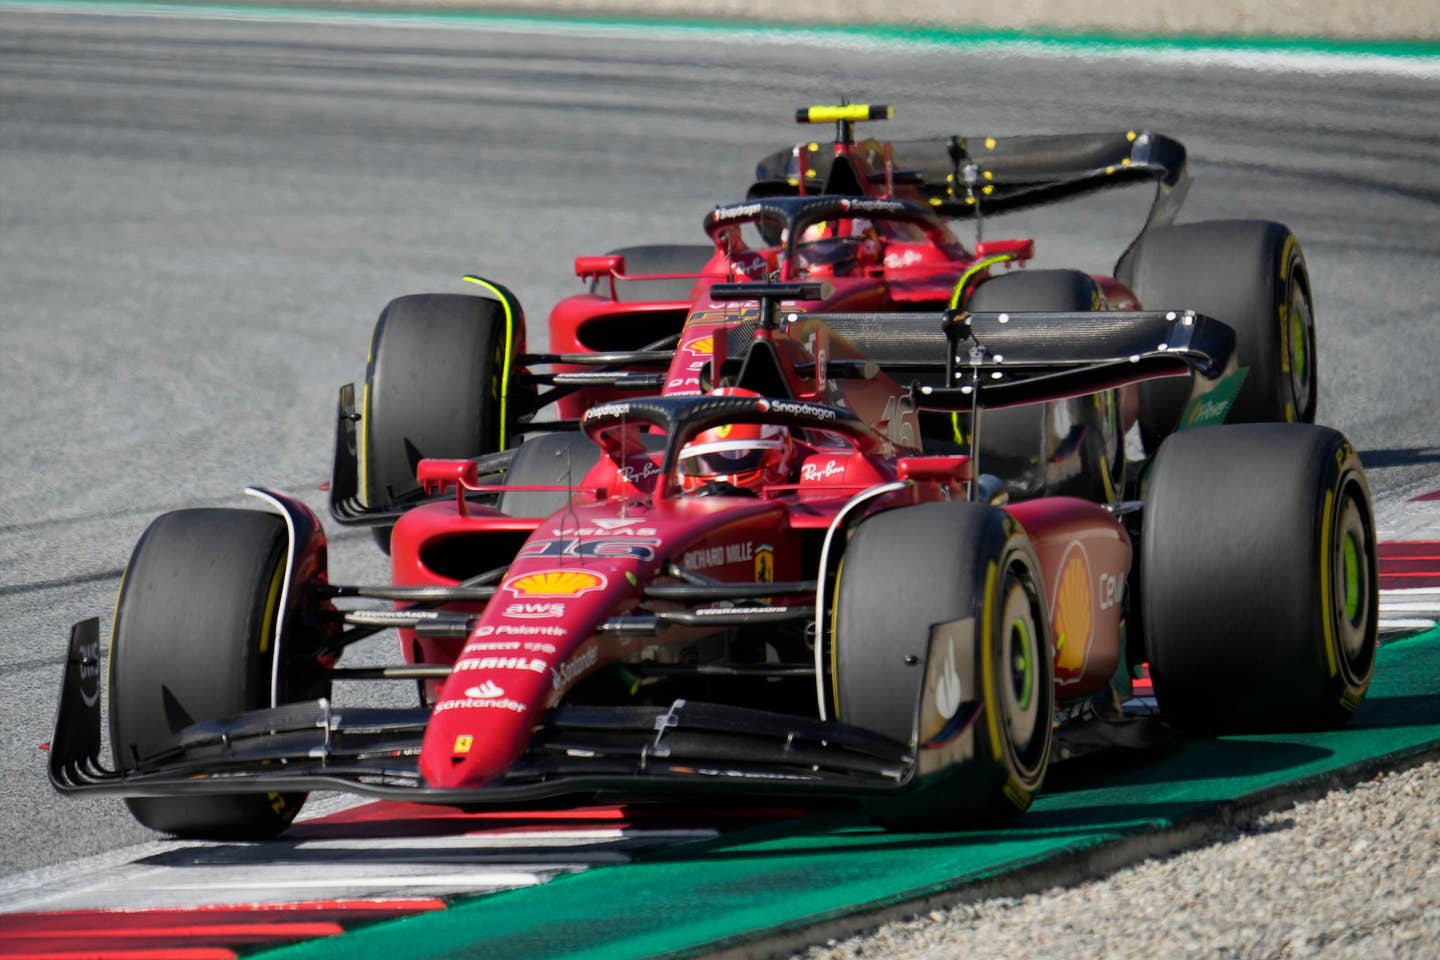 SPIELBERG, AUSTRIA - JULY 9: Charles Leclerc of Monaco and Ferrari during the F1 Grand Prix of Austria - Sprint at Red Bull Ring on July 9, 2022 in Spielberg, Austria. (Photo by Josef Bollwein/SEPA.Media /Getty Images)